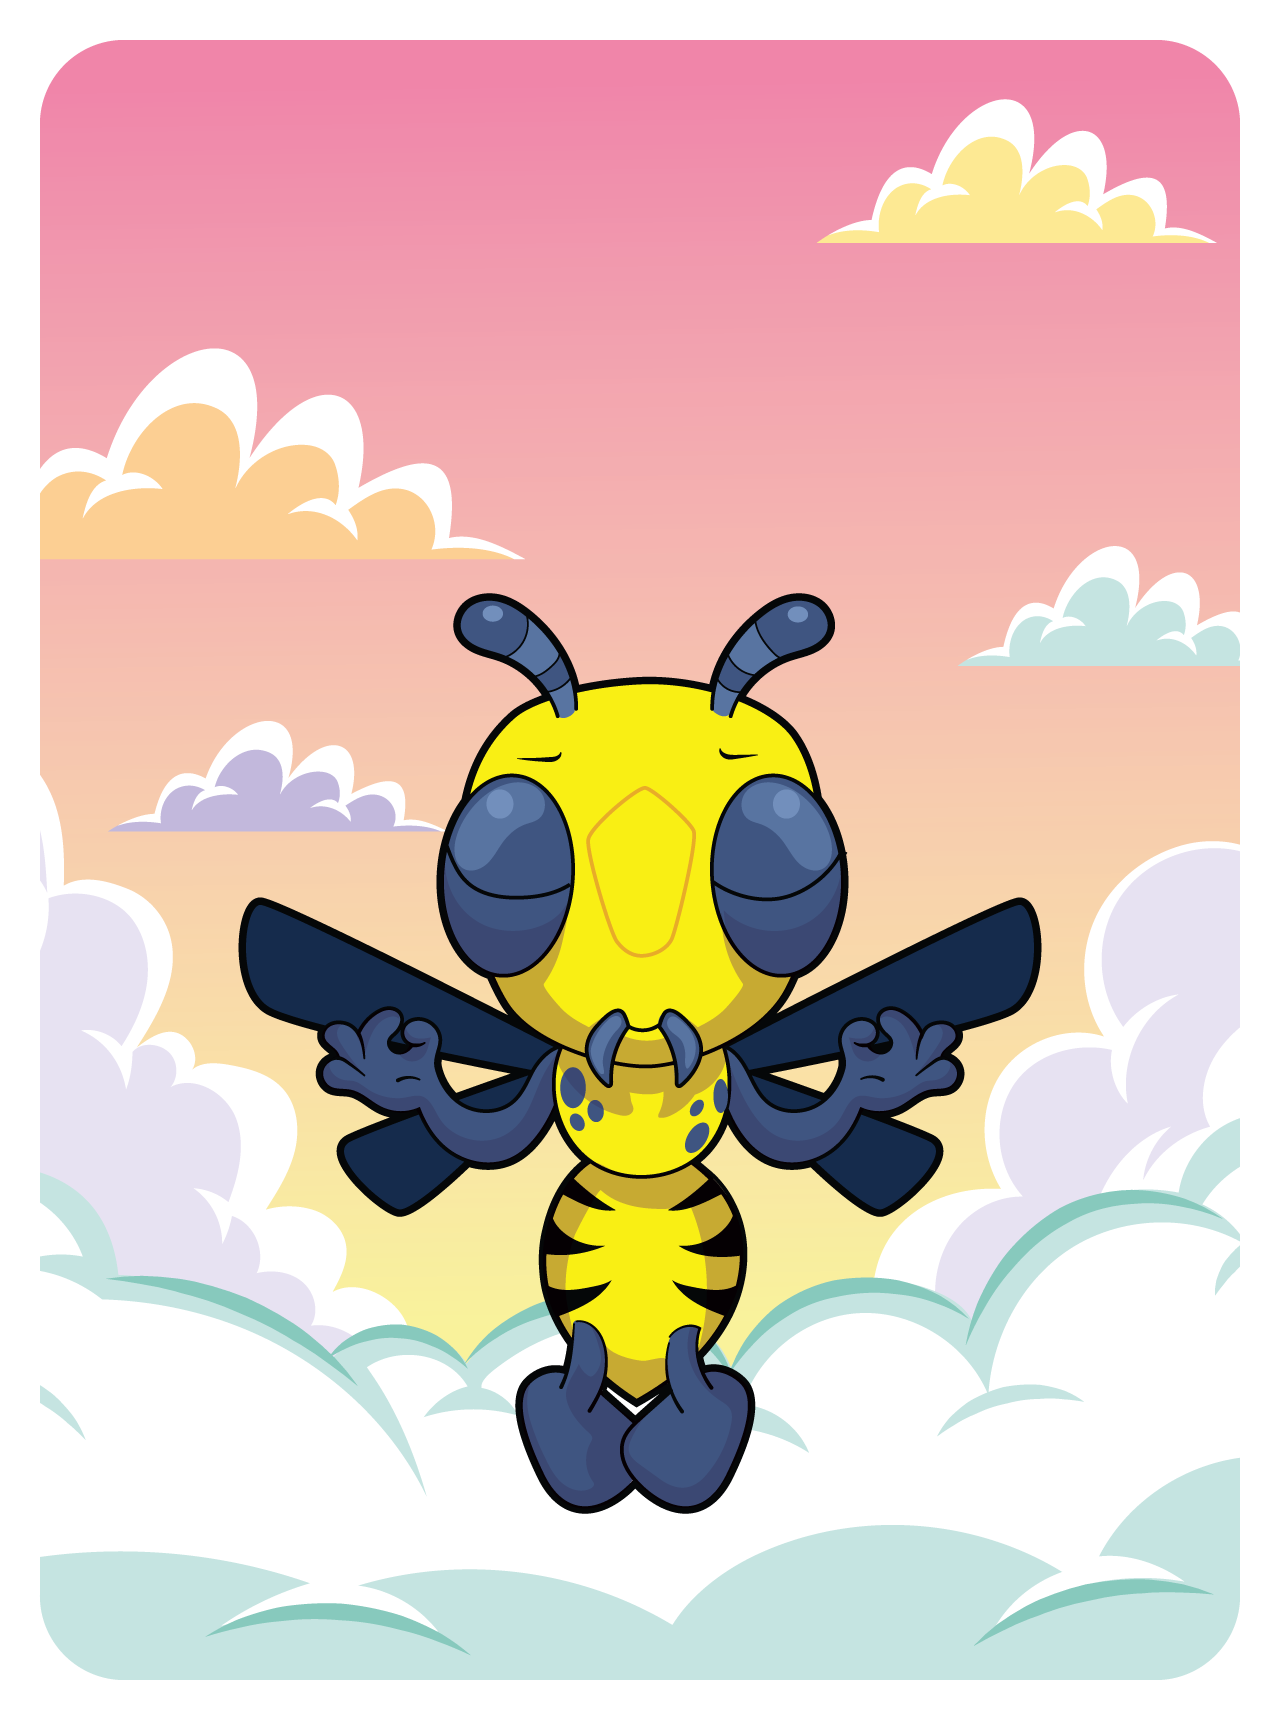 Wise Wasp #33344